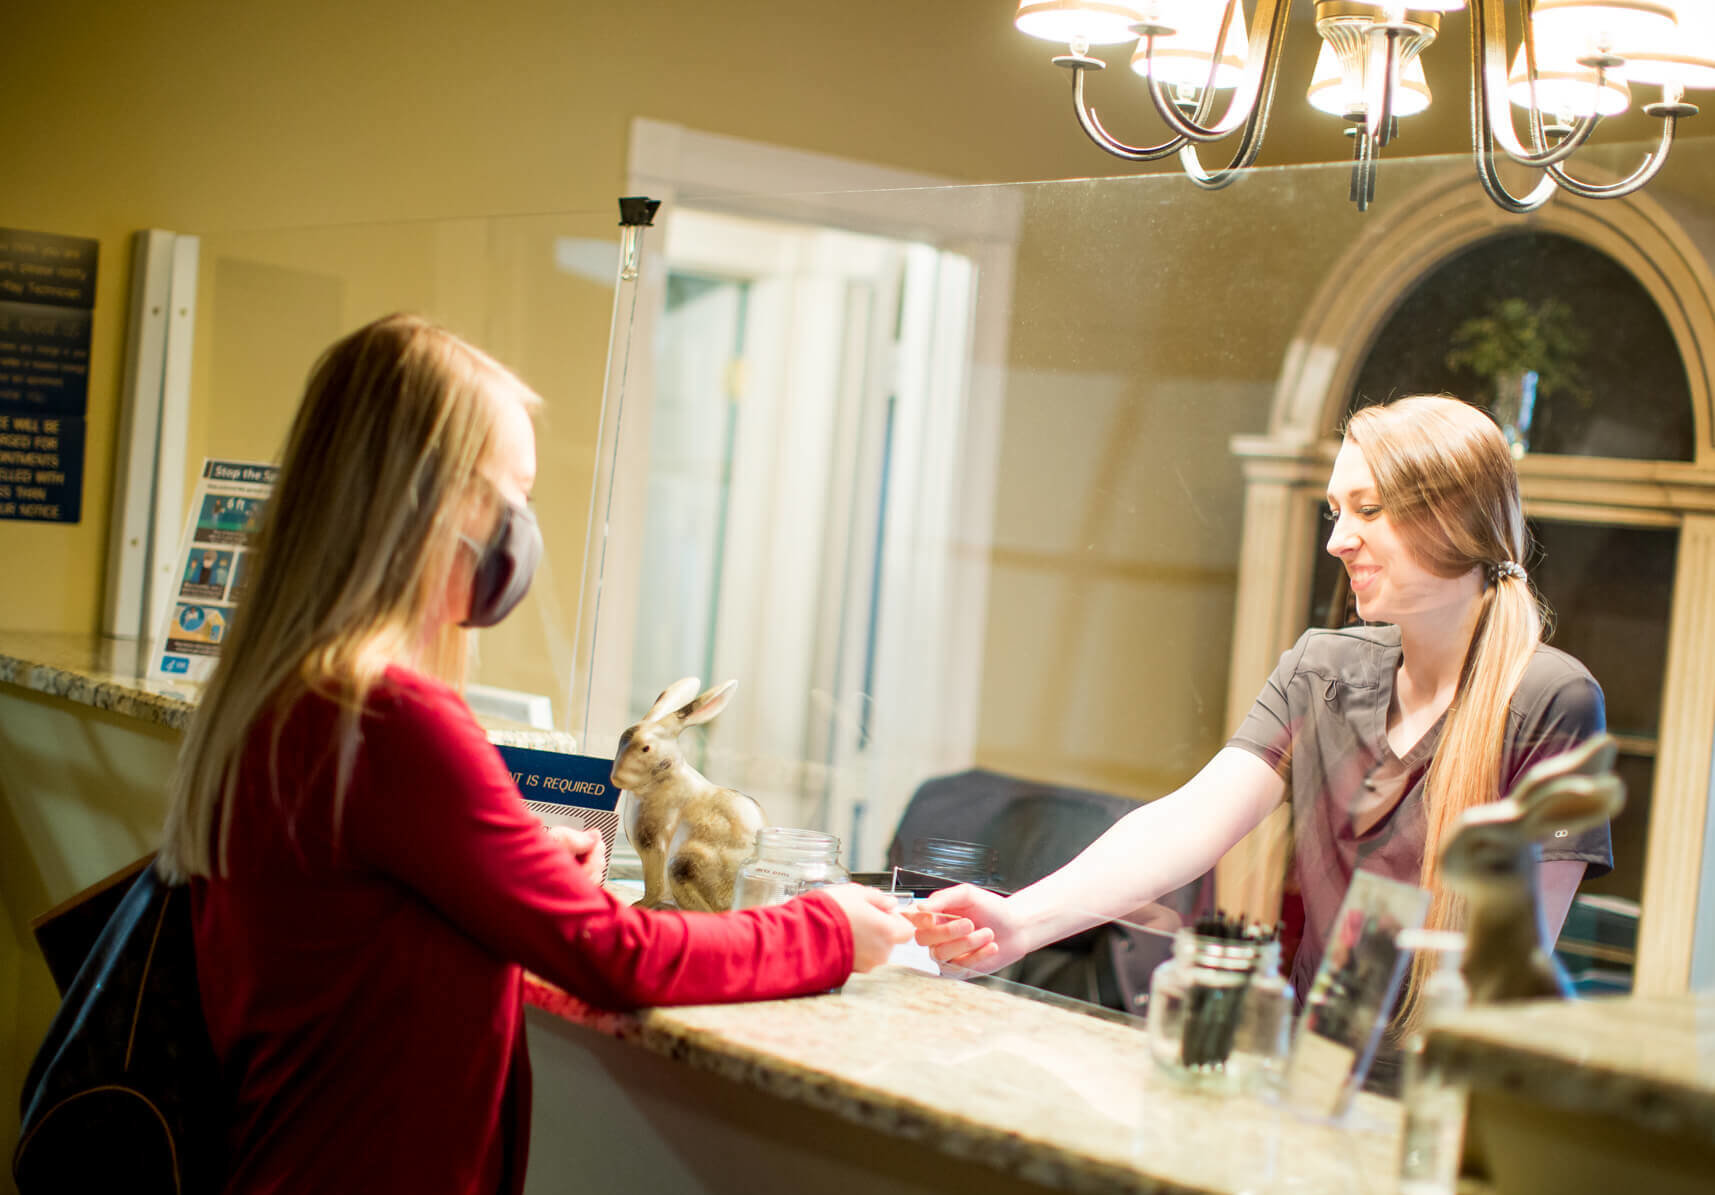 A team member smiles and speaks with a patient at the front desk.